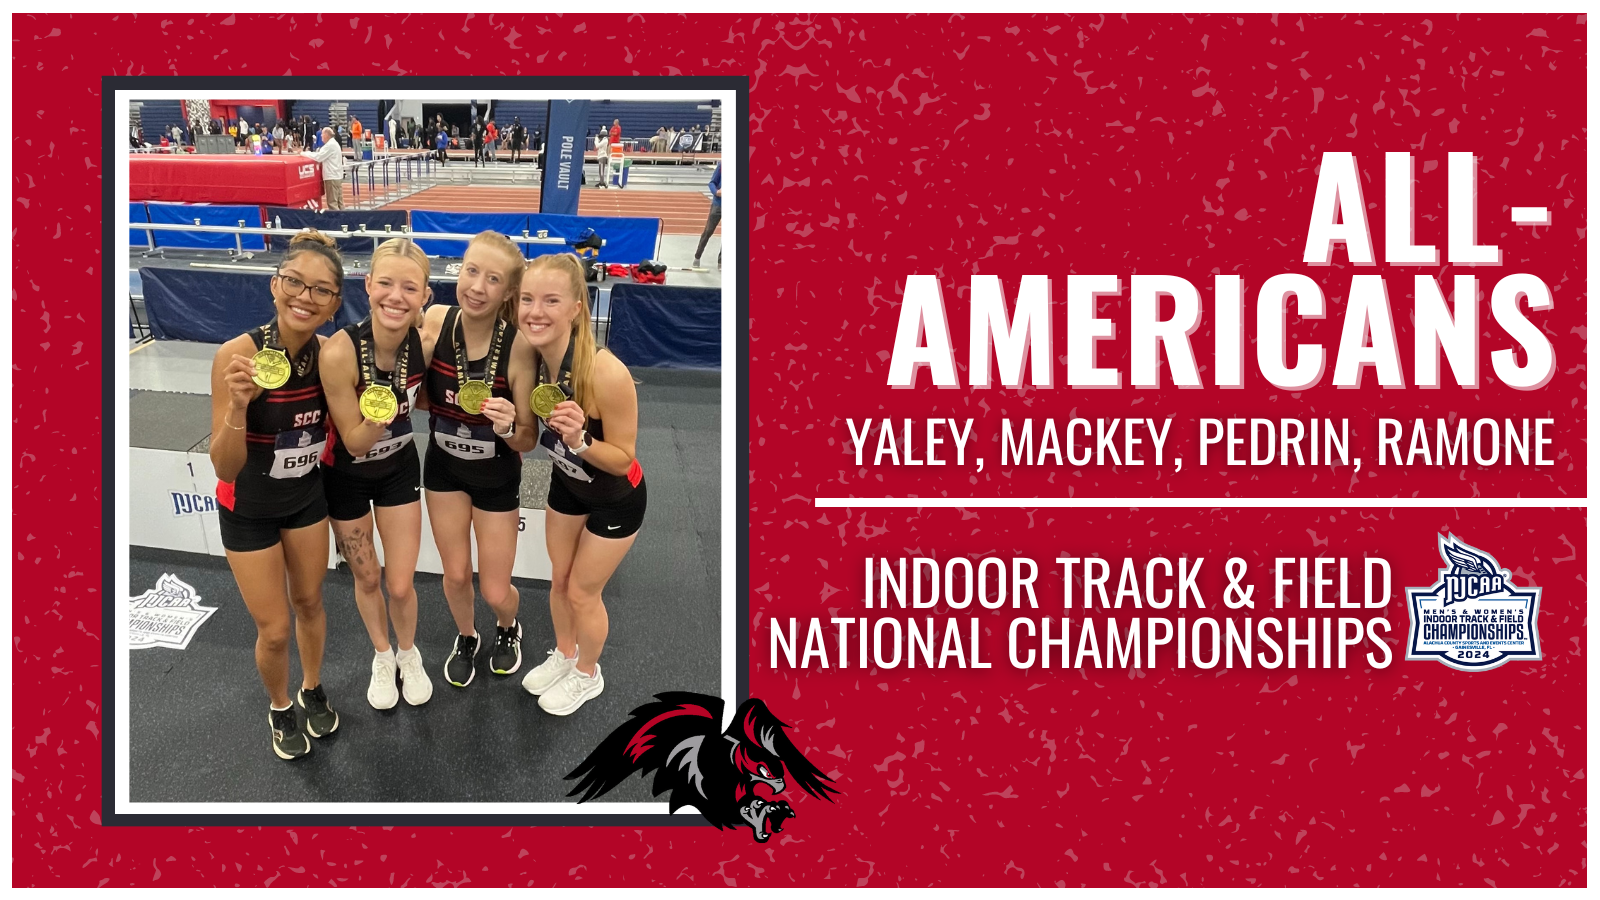 WOMEN'S INDOOR TRACK & FIELD EARN ALL-AMERICAN HONORS AT NATIONALS